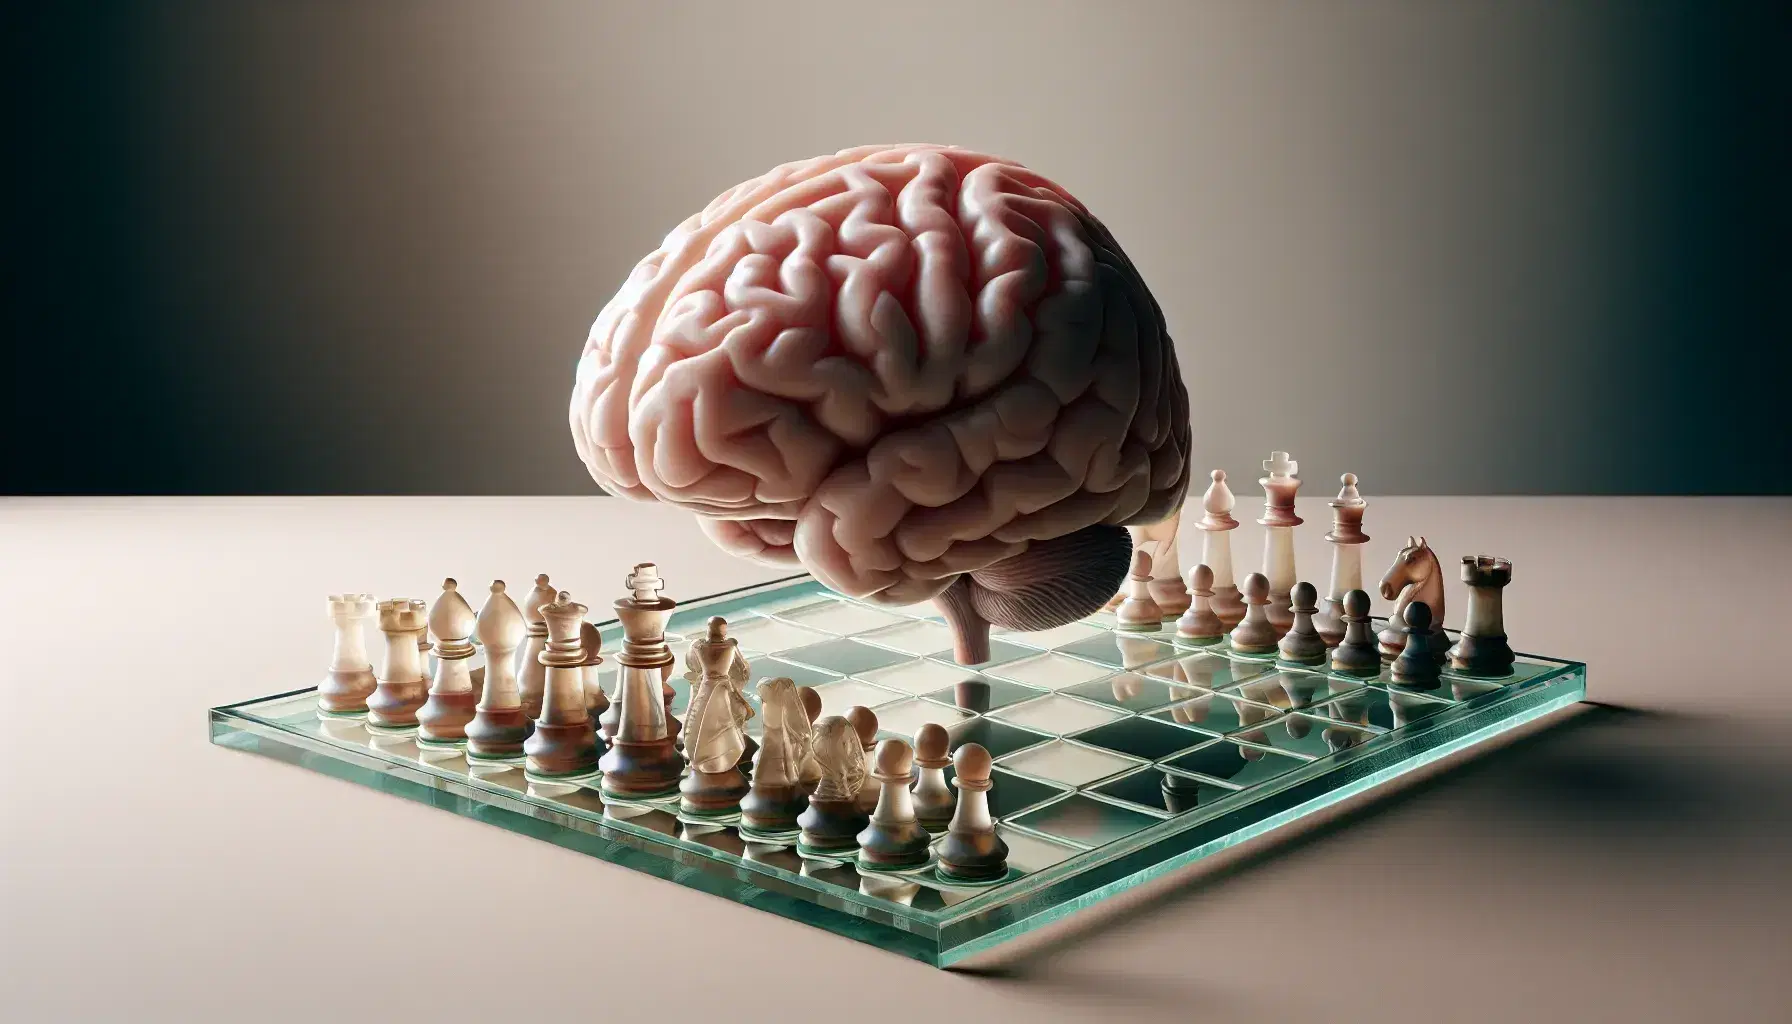 Detailed anatomical model of human brain in lateral view on neutral background with glass chess board and pieces in starting position.